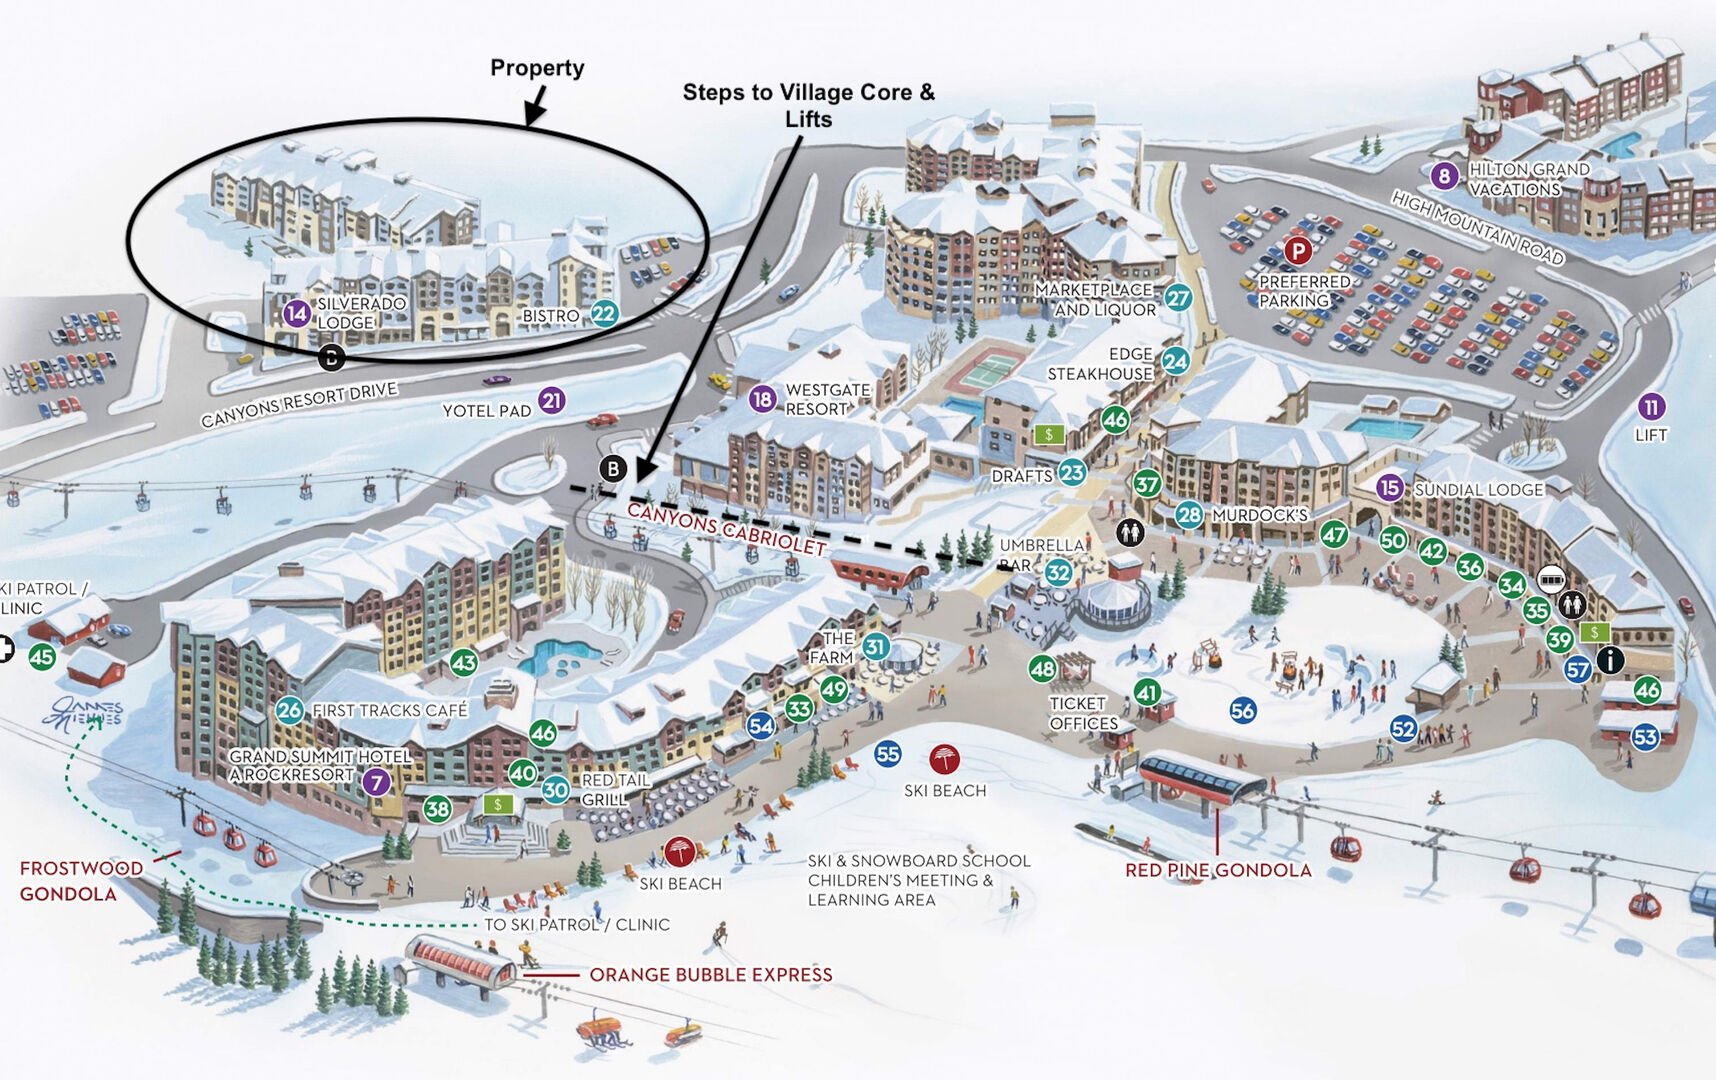 Steps take you from the property to the canyons village core and skiing